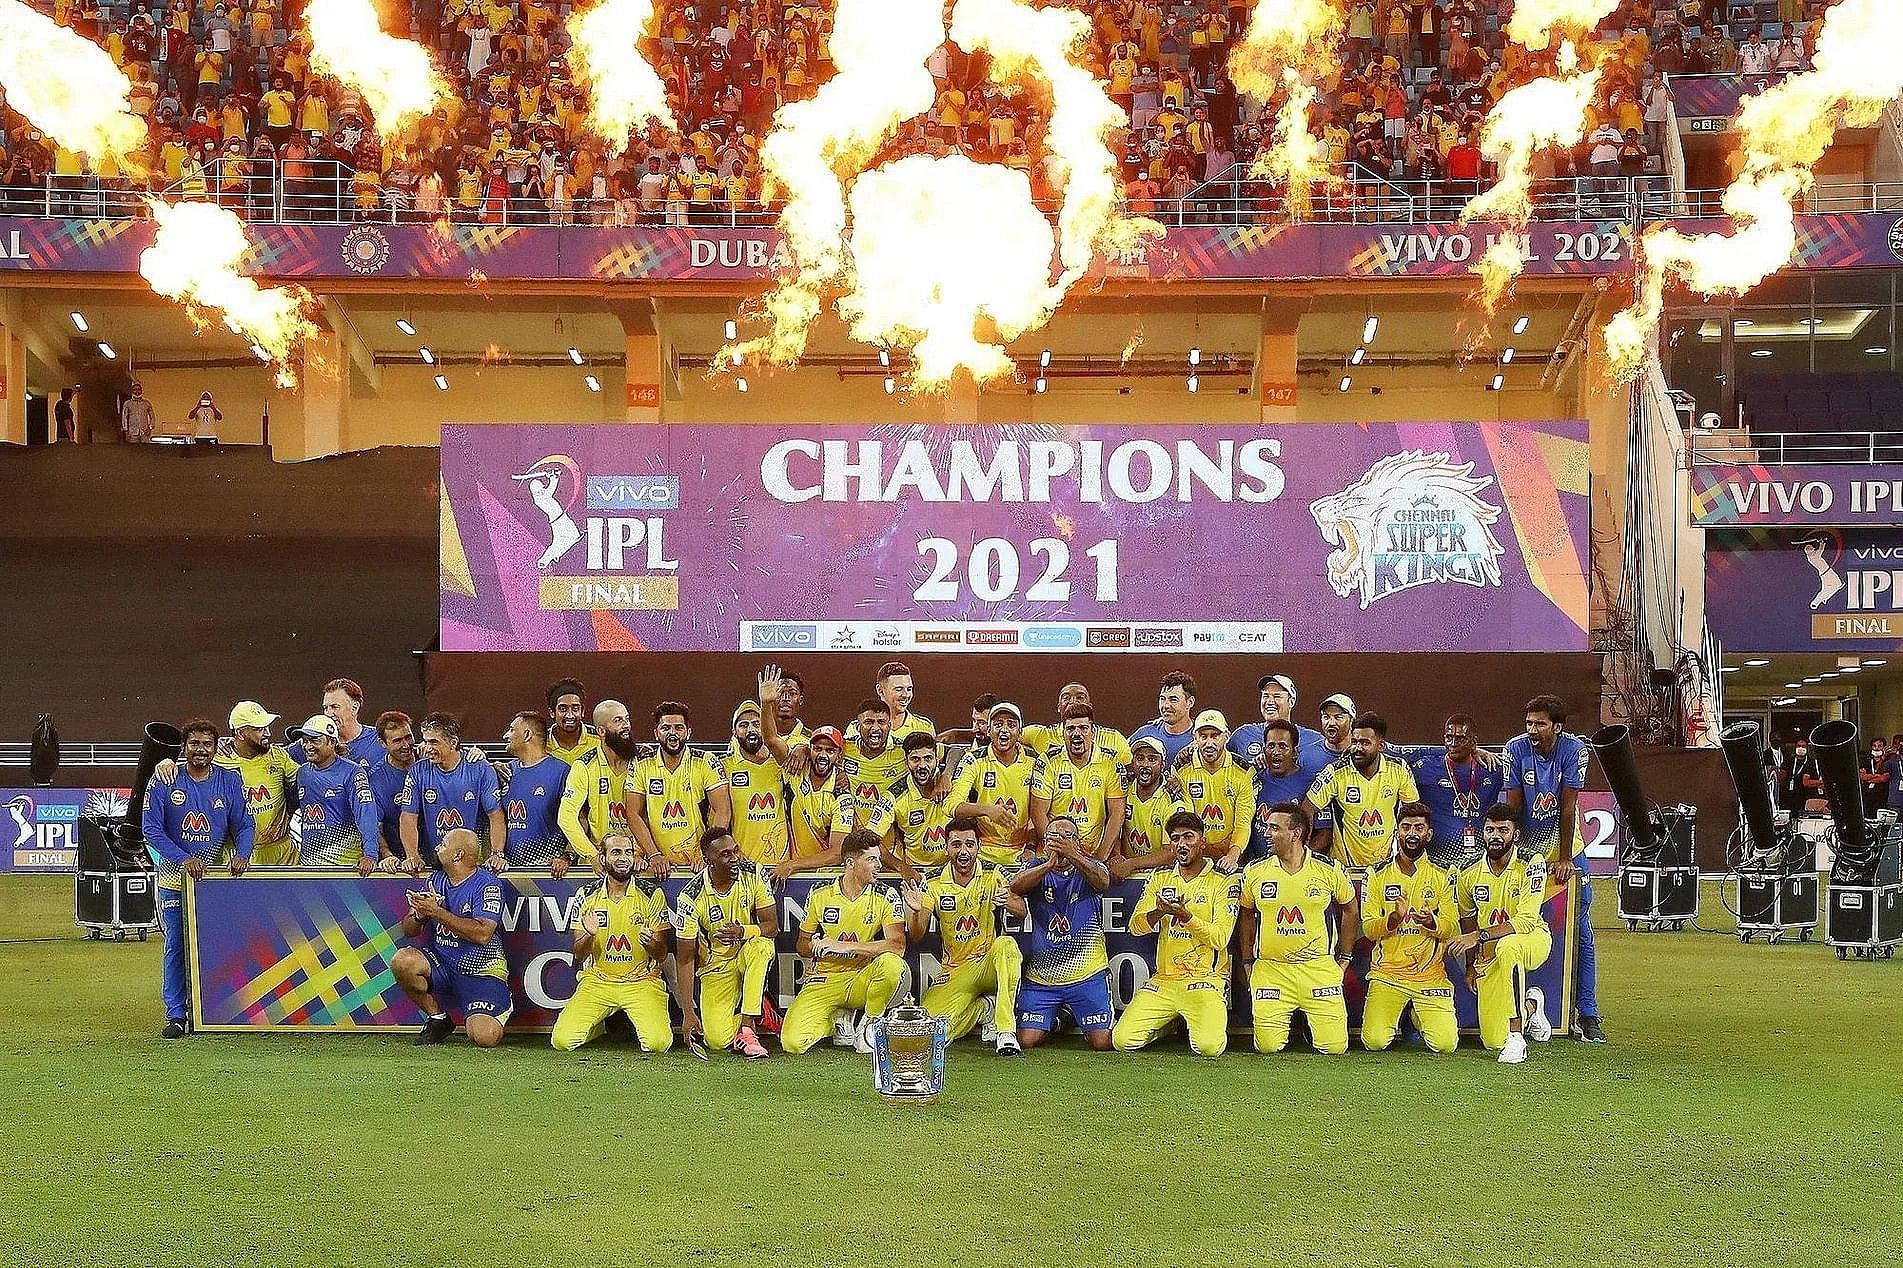 Reigning champions Chennai Super Kings will head in as favorites at IPL 2022